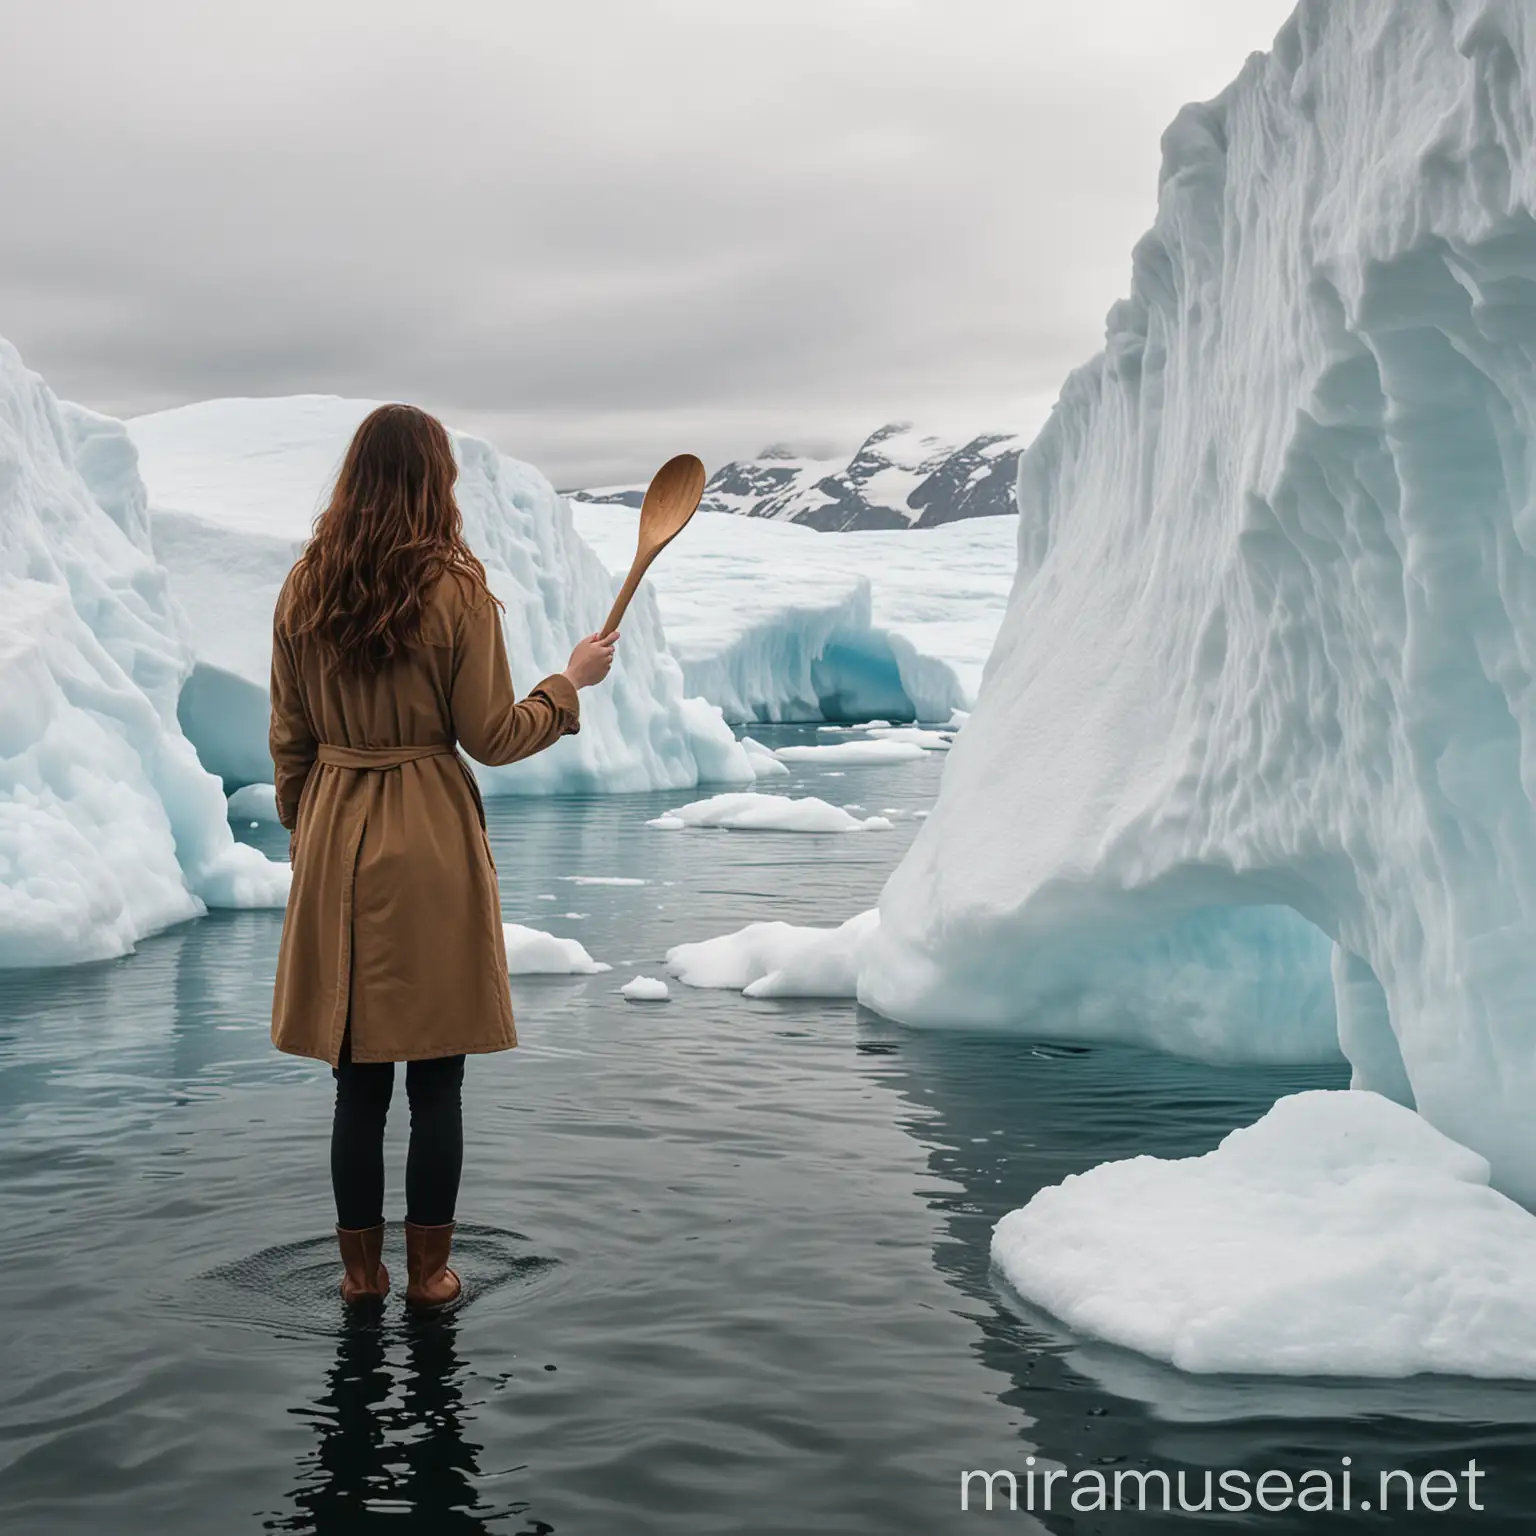 Woman Breaking Iceberg with Wooden Spoon Arctic Exploration Concept Art